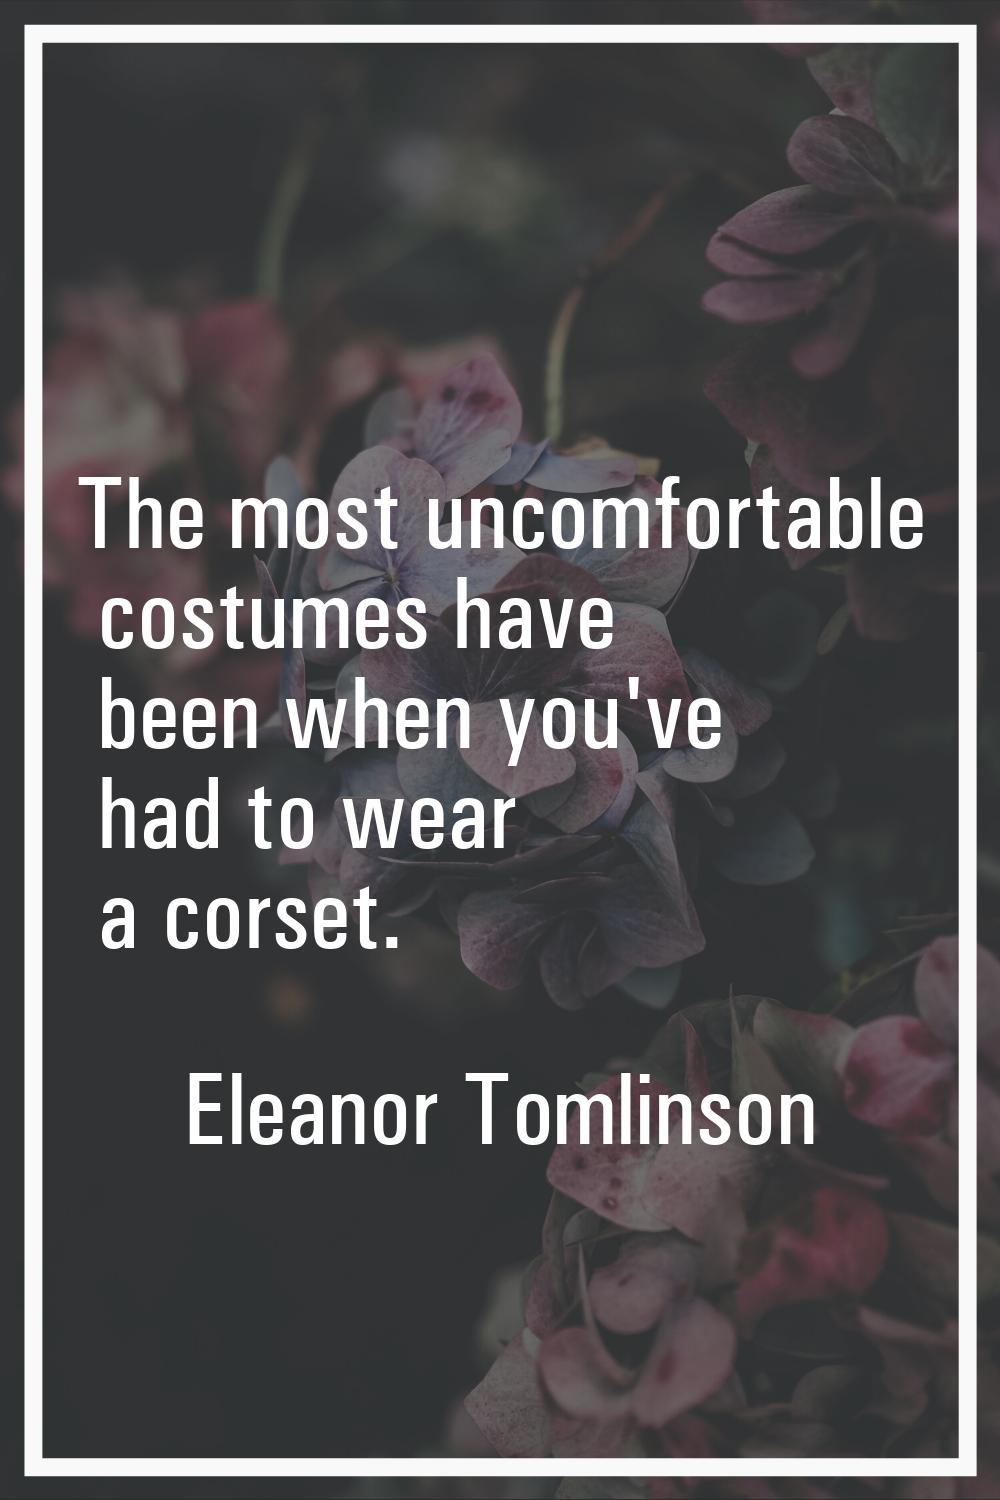 The most uncomfortable costumes have been when you've had to wear a corset.